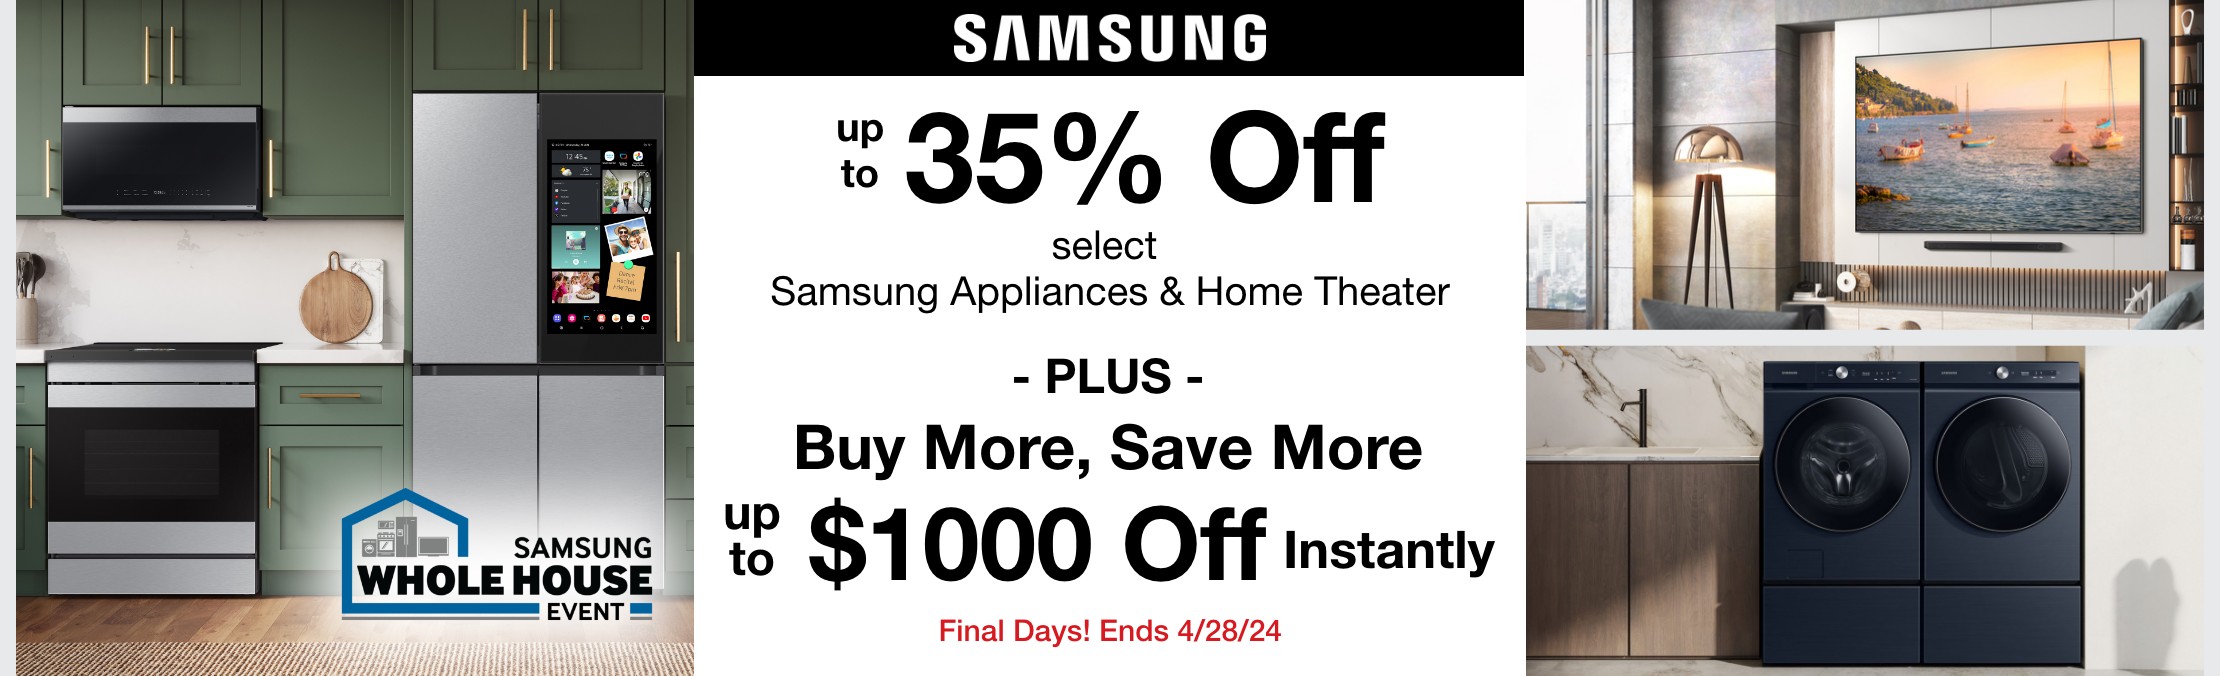 Final Days! Samsung Whole House Event Up to 35% off select Samsung Appliances & select samsung home theater plus buy more save more up to $1000 off instantly valid thru 4/28/24